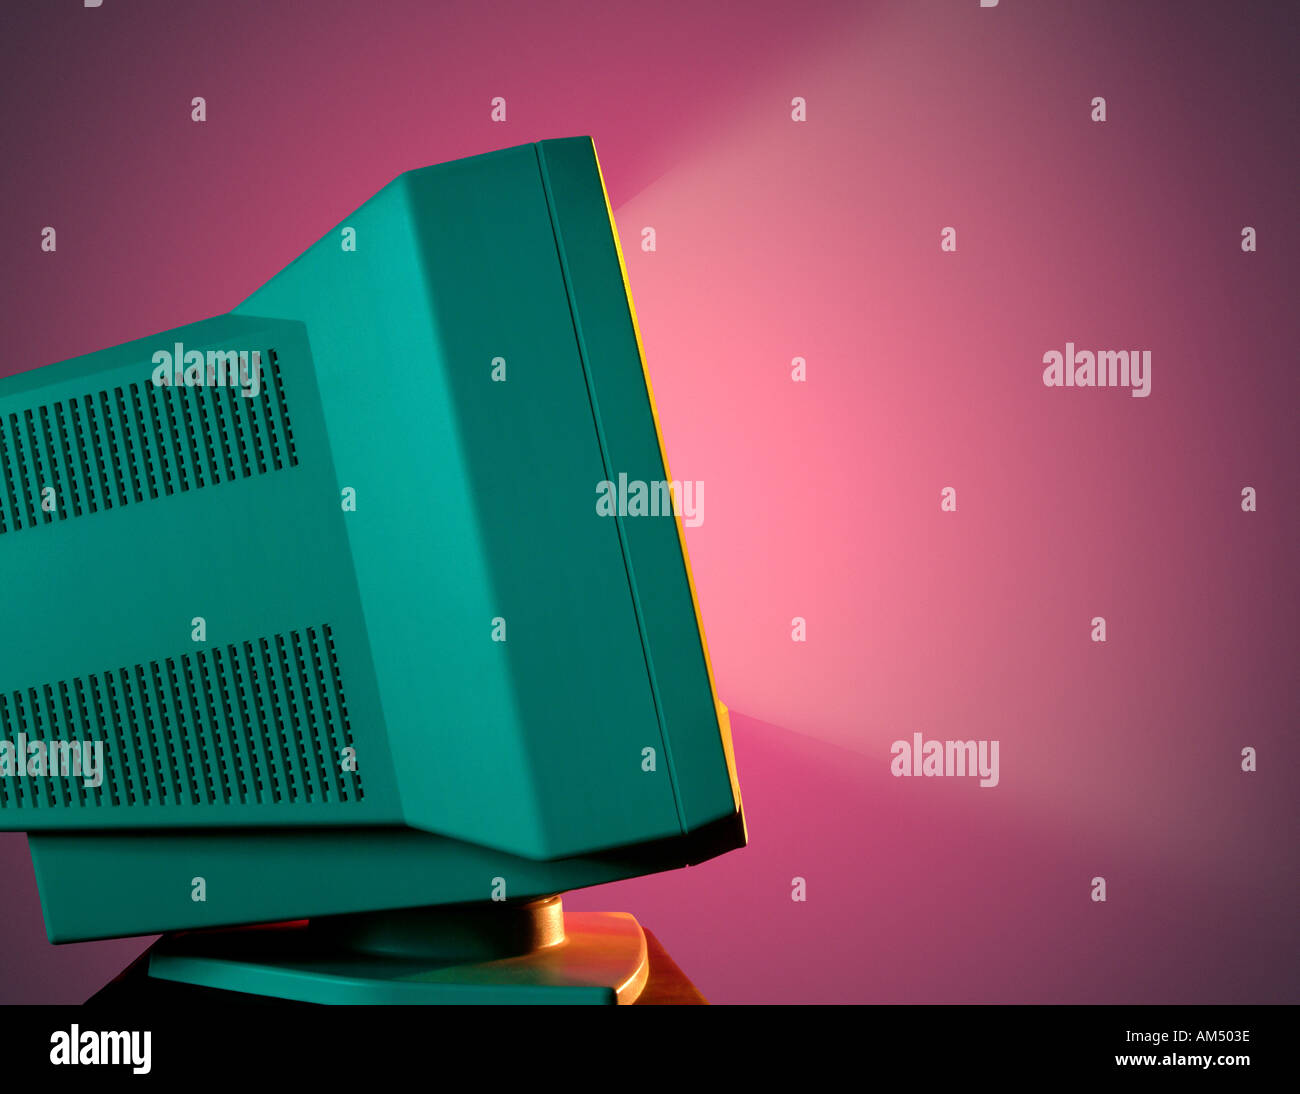 computer monitor glowing brightly. Stock Photo